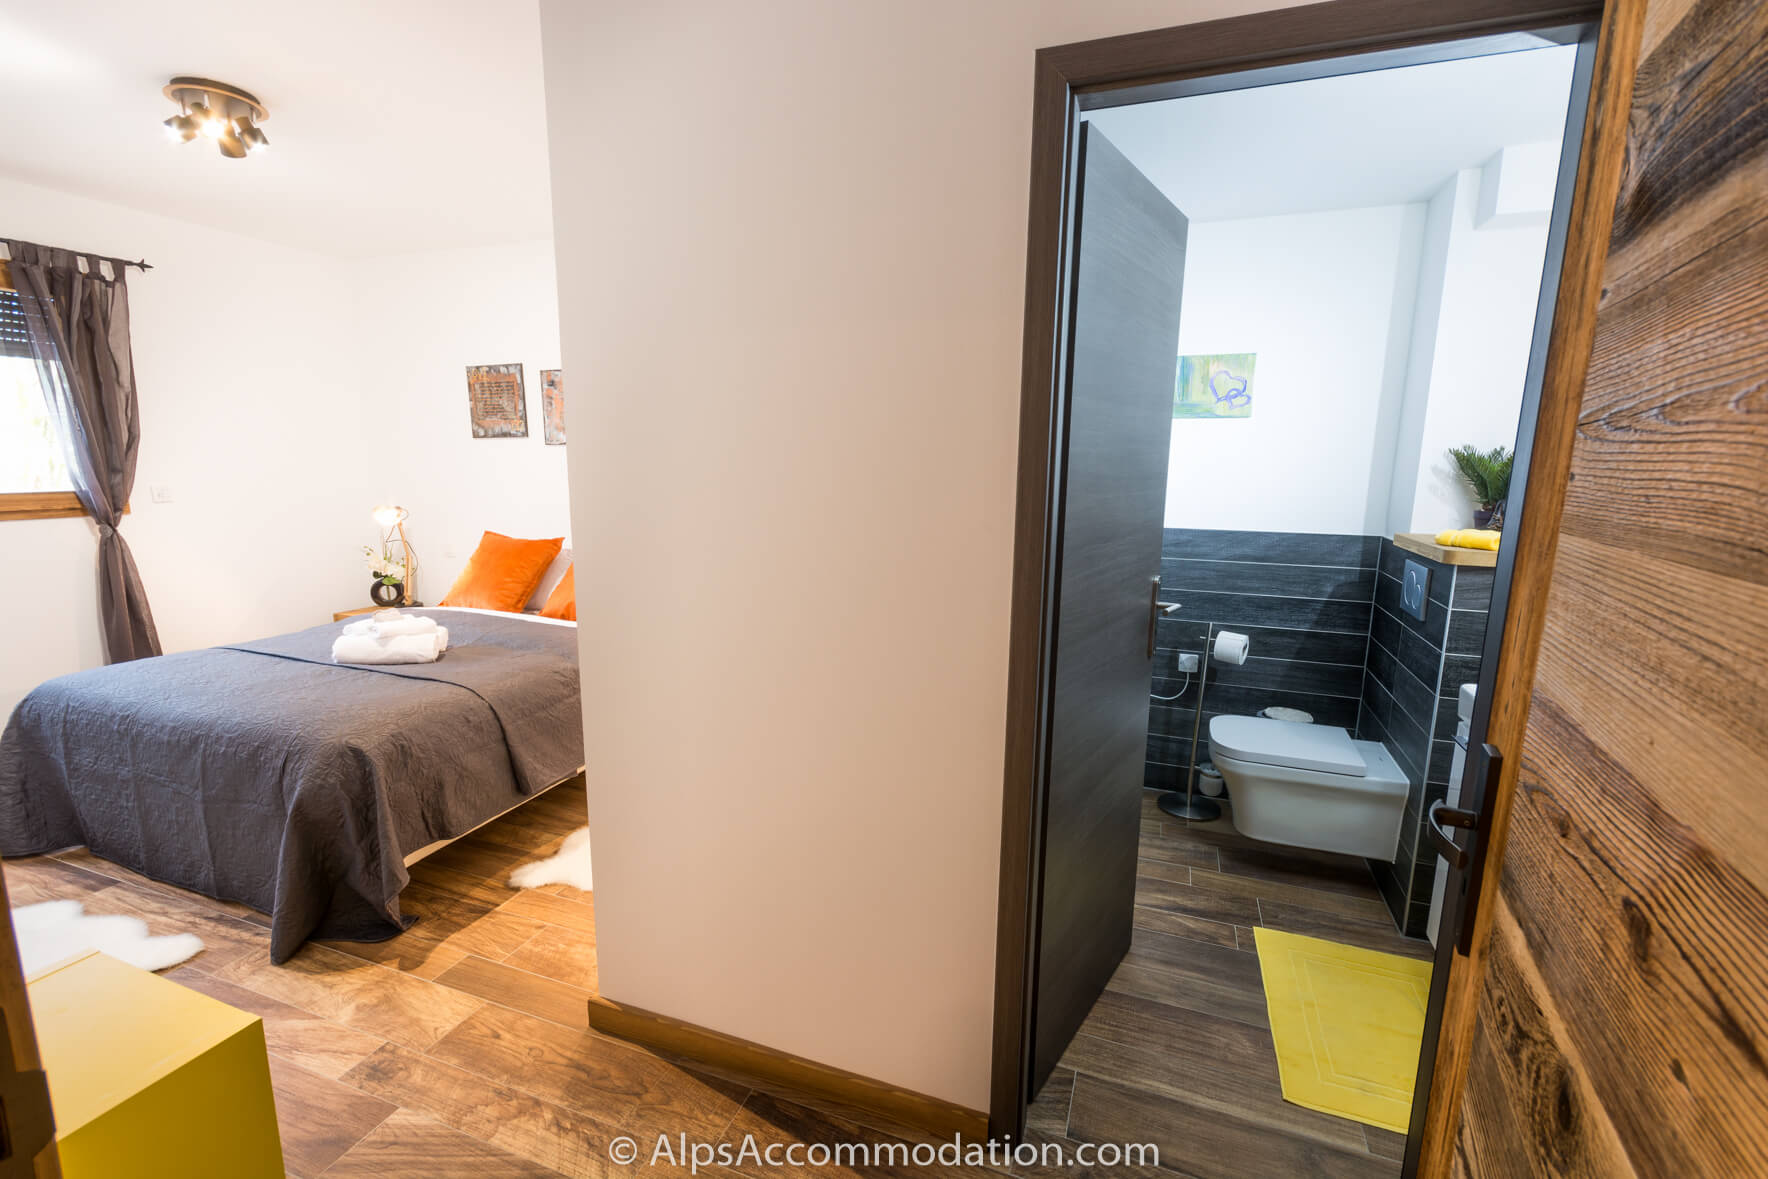 Chalet Sole Mio Morillon - A spacious ensuite bedroom on the lower level